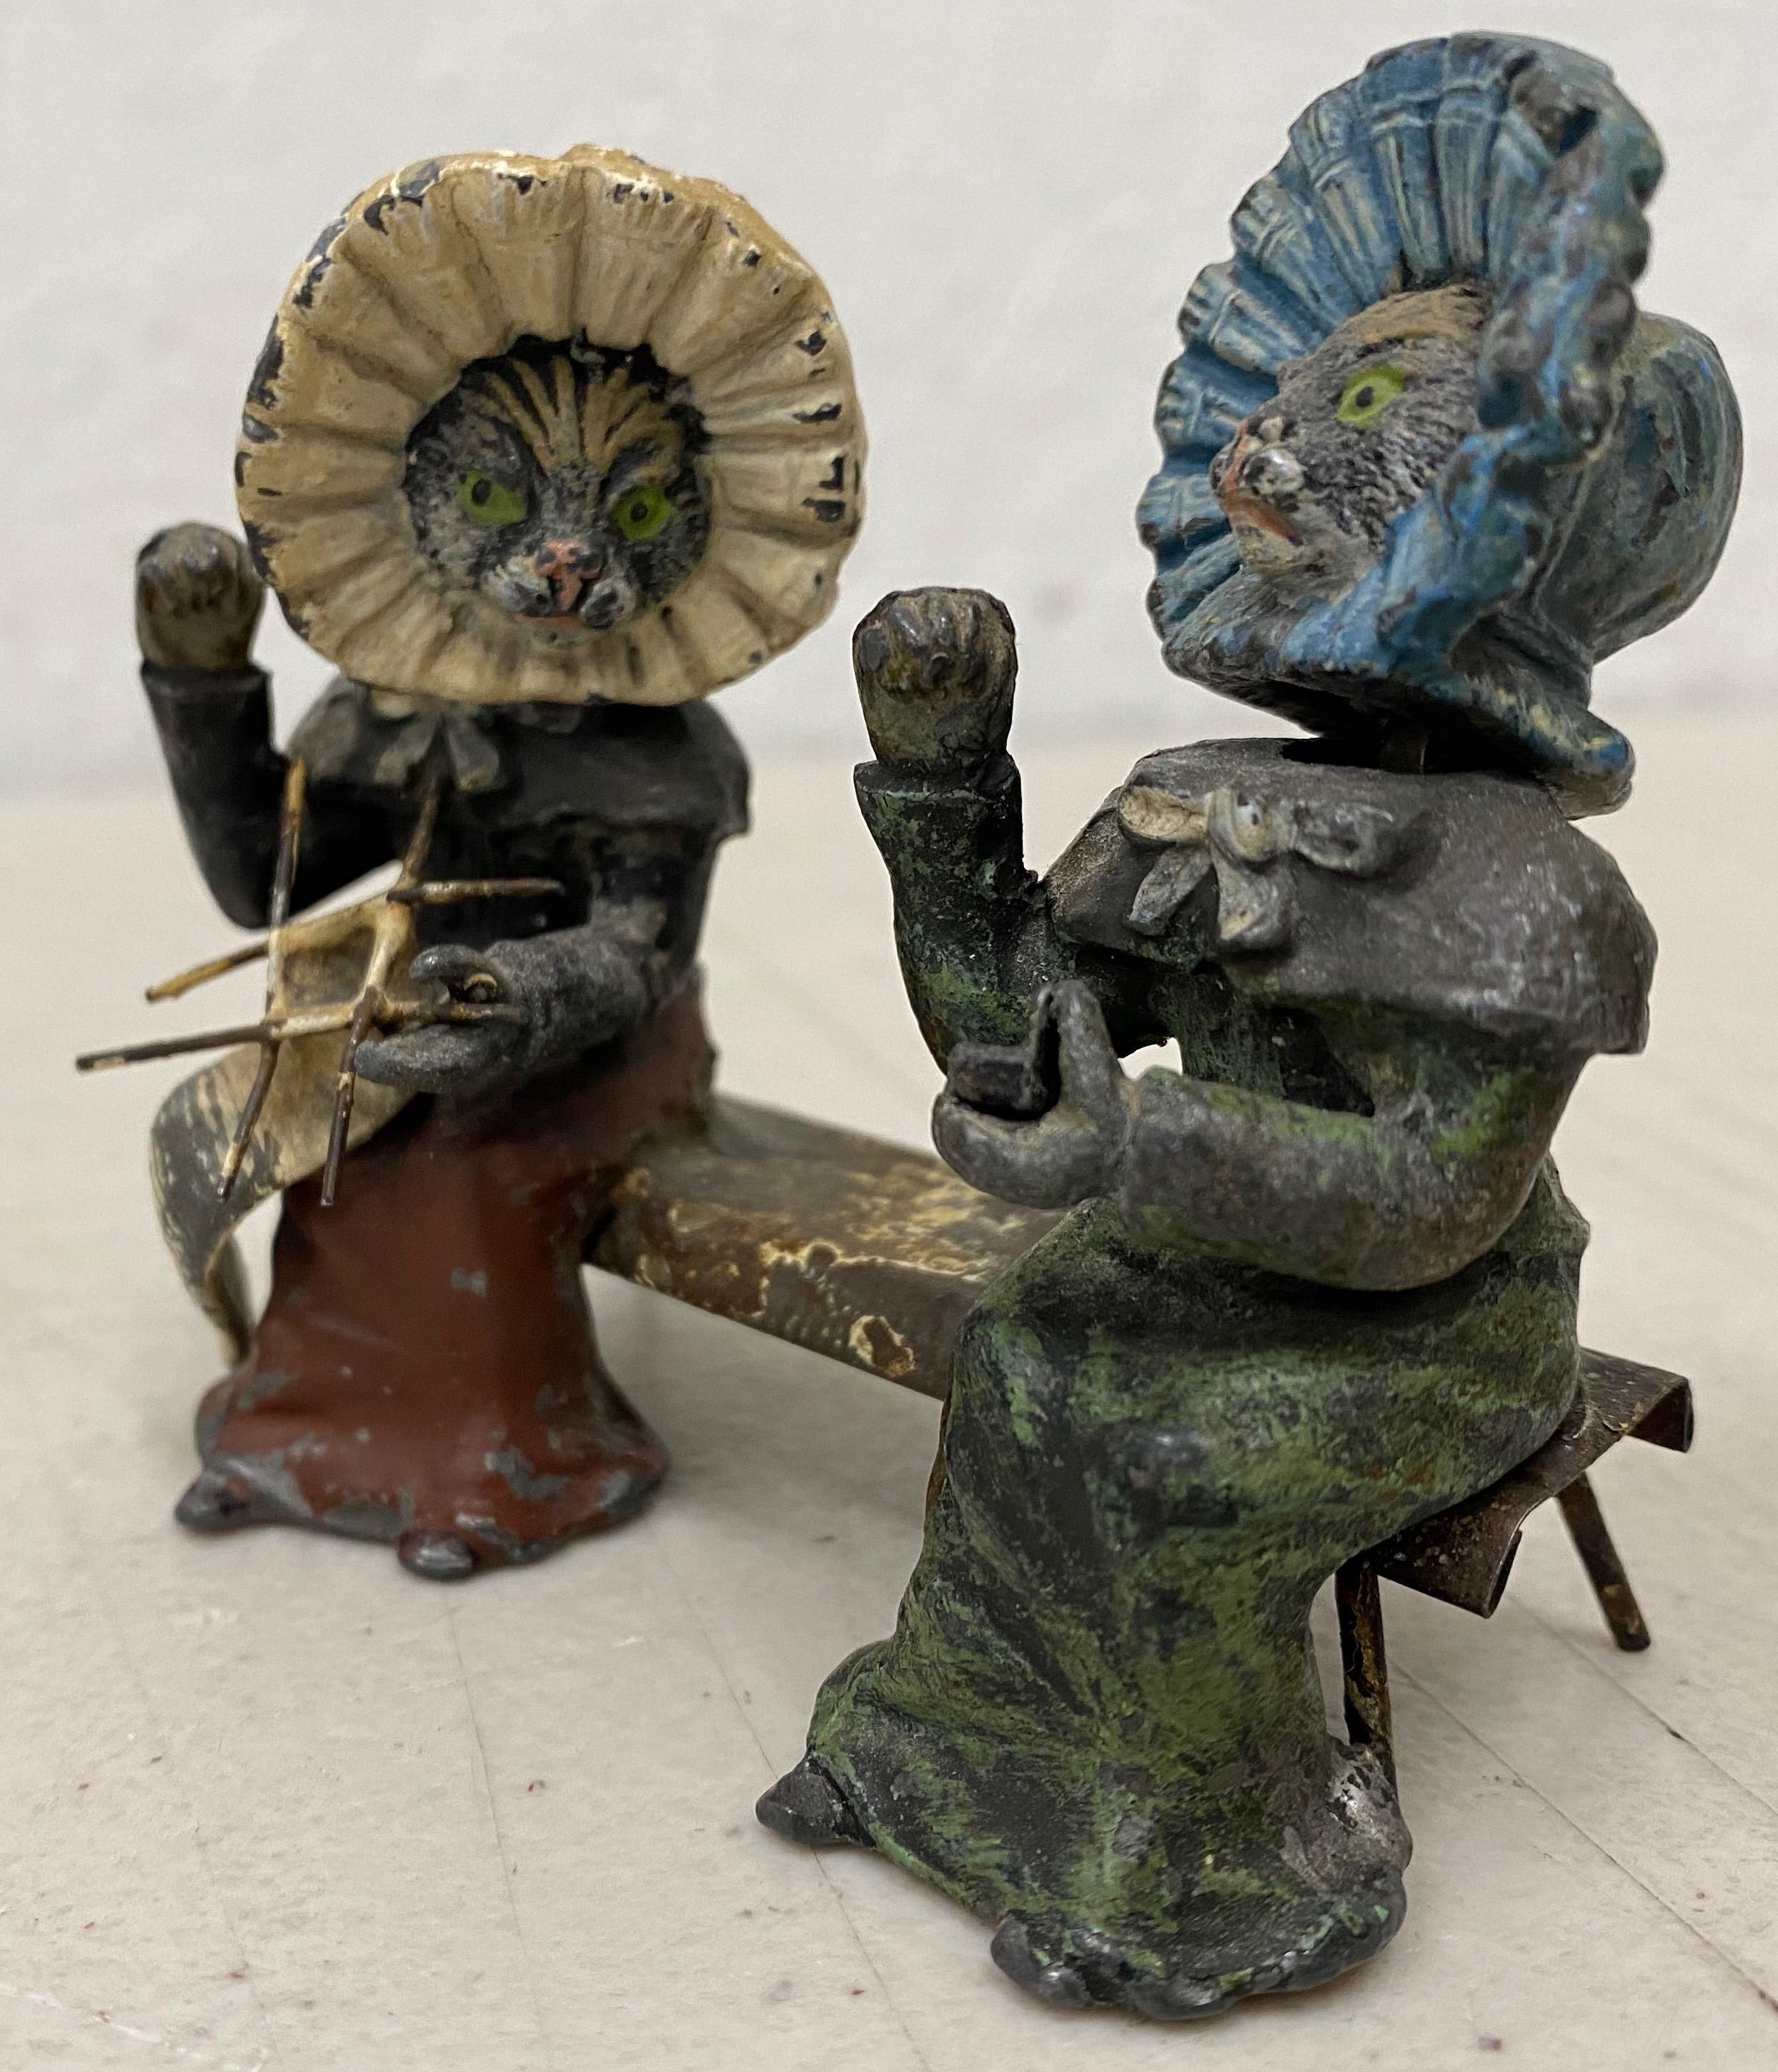 19th century Georg Heyde painted metal cats with shaking heads, circa 1890s

A charming pair of ladies on a bench. One is knitting and the other is holding a small case. Each cat wears a bonnet.

Each cat is hand painted over metal. Good antique